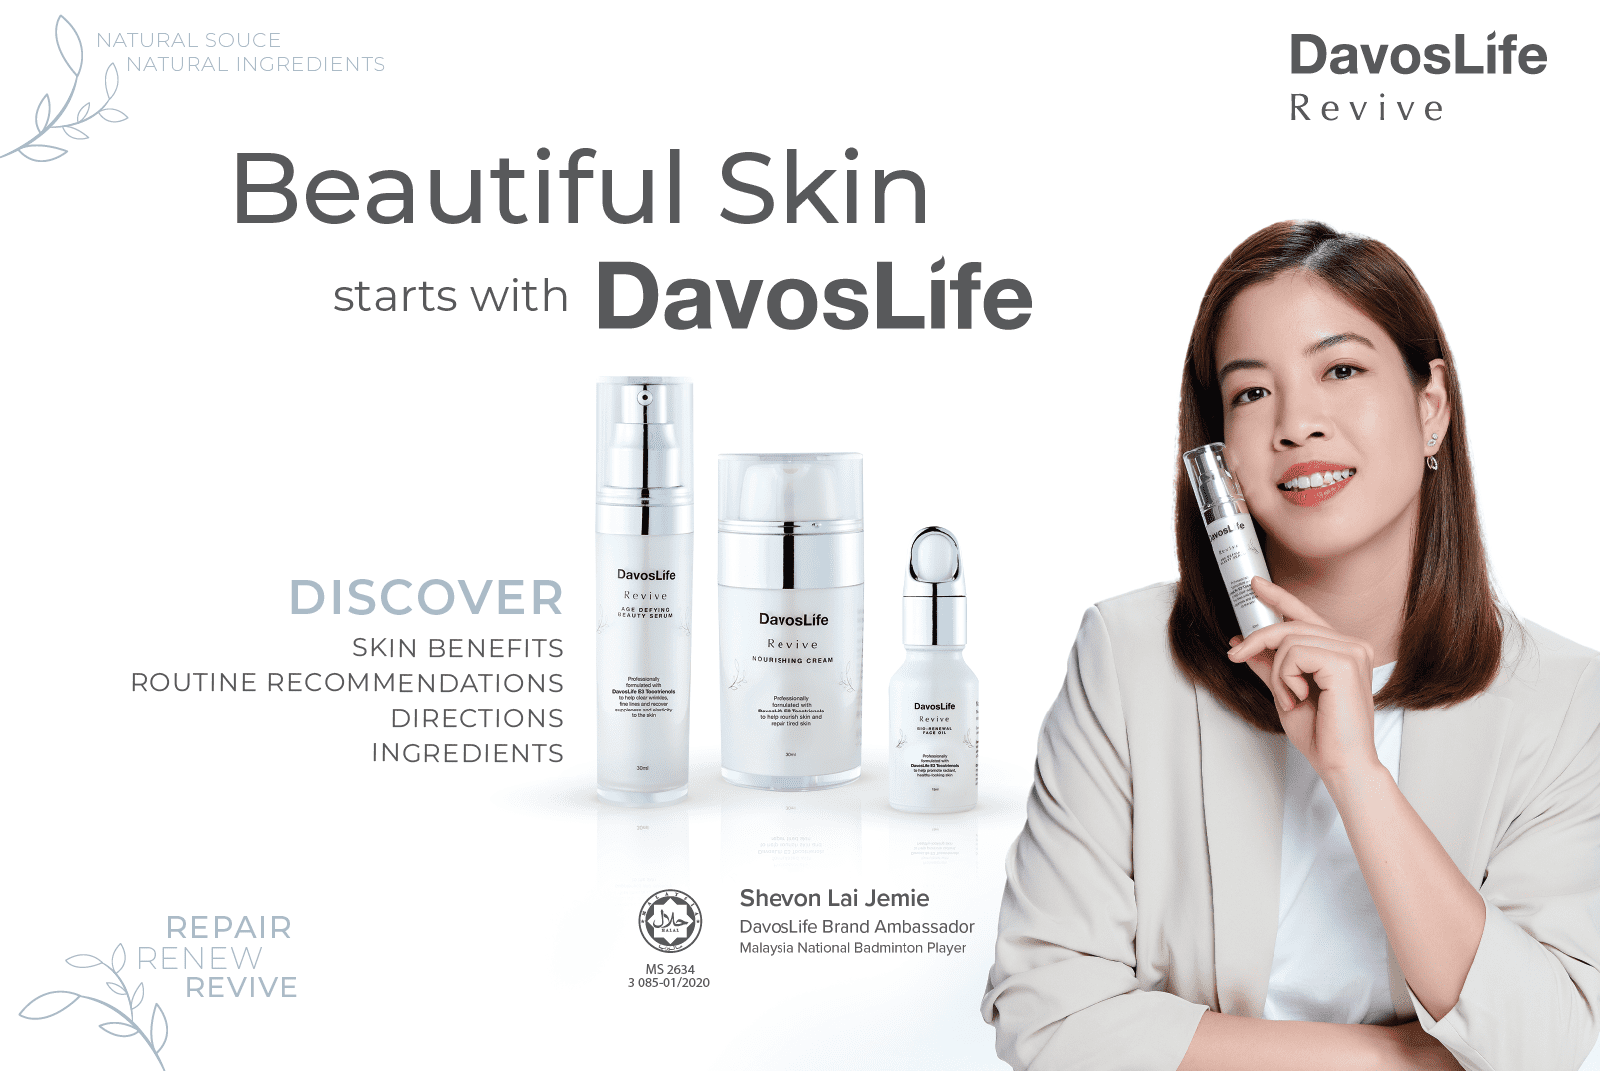 DavosLife Revive (Featured Image)